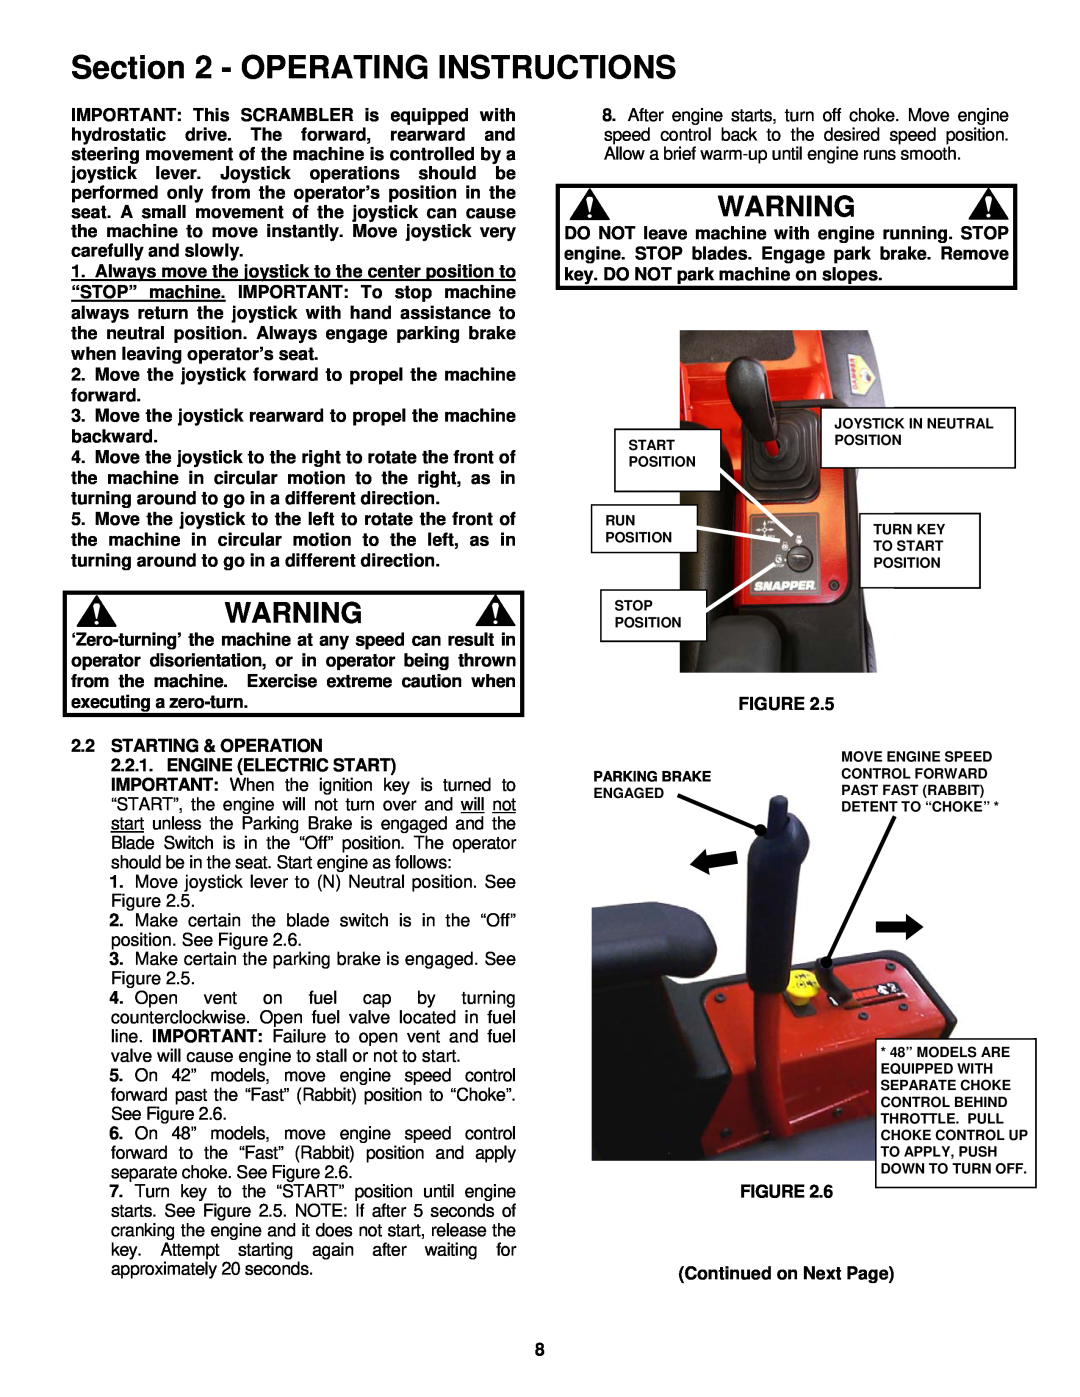 Snapper YZ18426BVE, YZ20486BVE Operating Instructions, Move joystick lever to N Neutral position. See Figure 